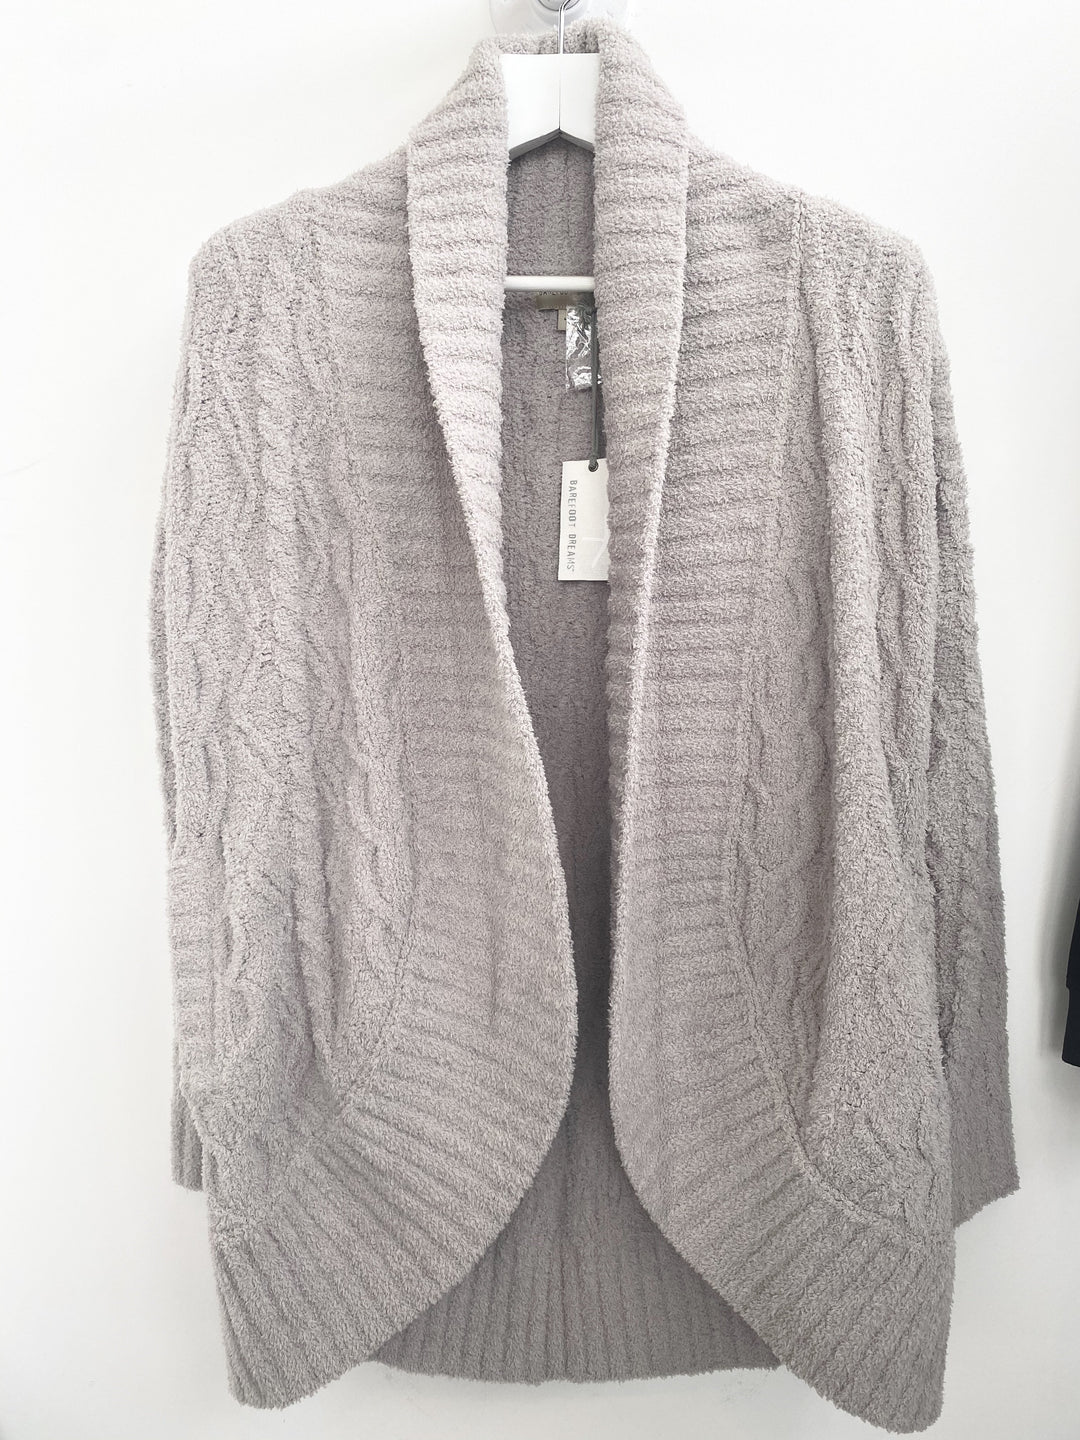 Barefoot Dreams - Cozychic Cable Shawl Cardi in Linen